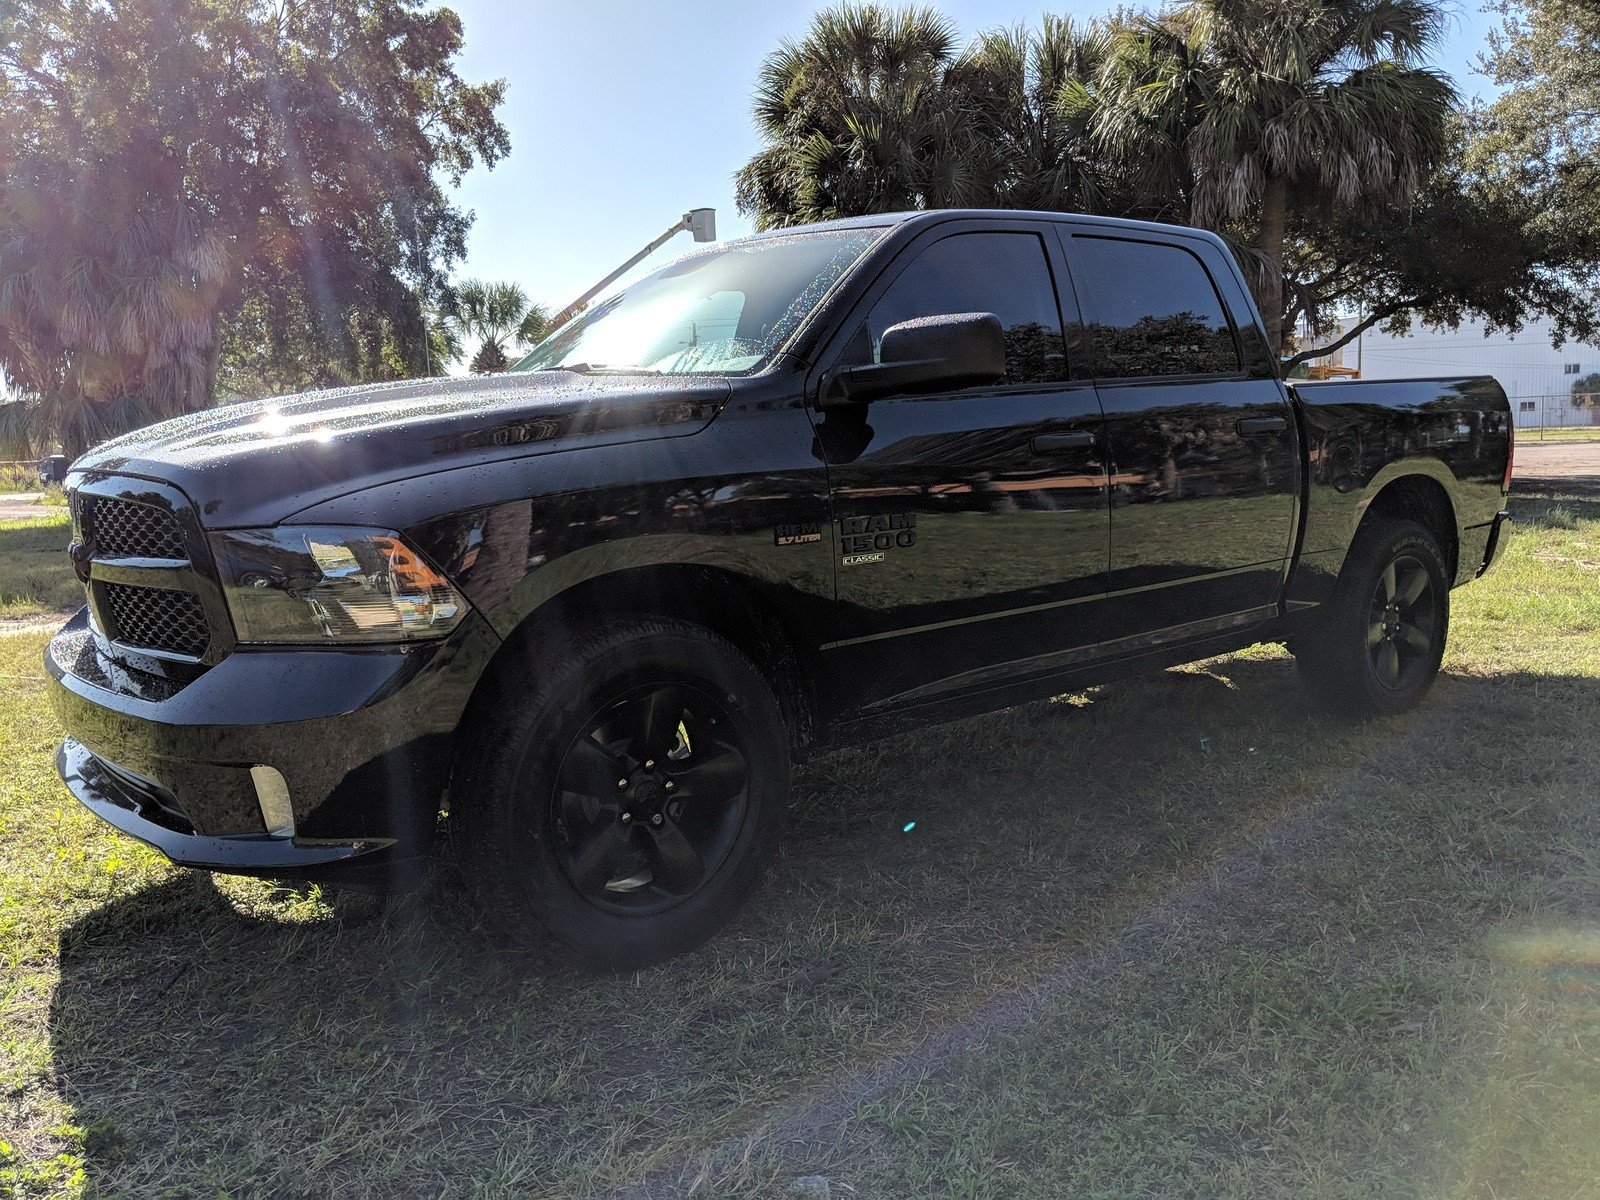 New 2019 RAM 1500 Classic Express Crew Cab in Tampa #S504728 | Jerry Ulm Chrysler, Dodge, Jeep, Ram What Size Tires Are On A 2019 Ram 1500 Classic